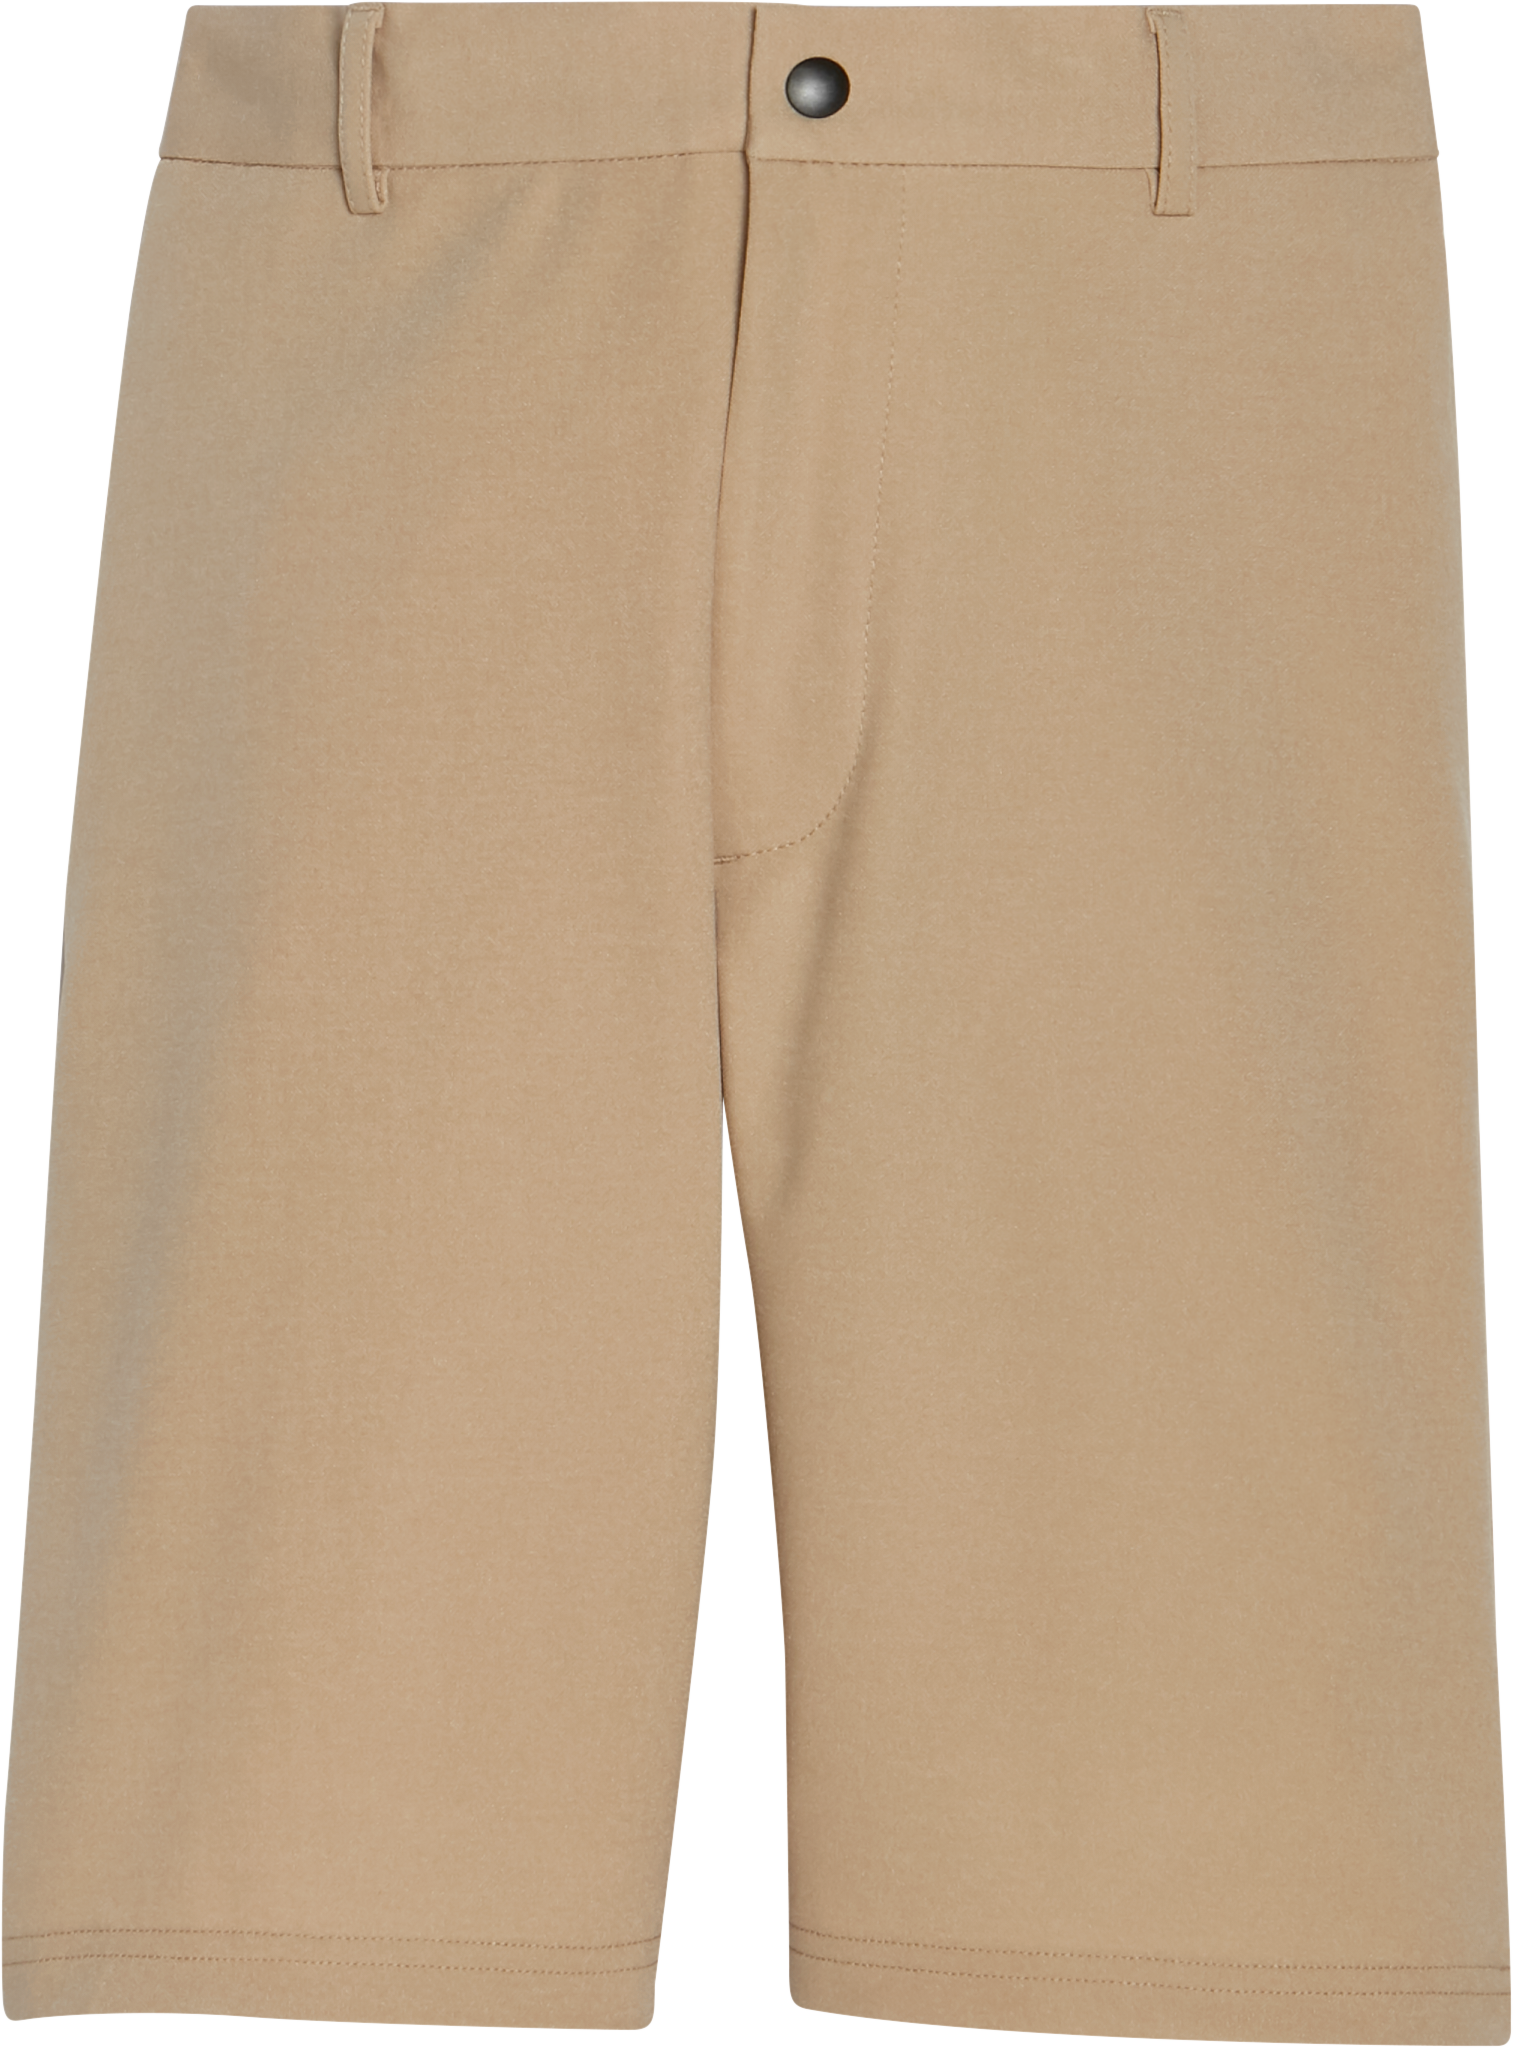 Msx By Michael Strahan Modern Fit Activewear Shorts Tan Mens Sale 